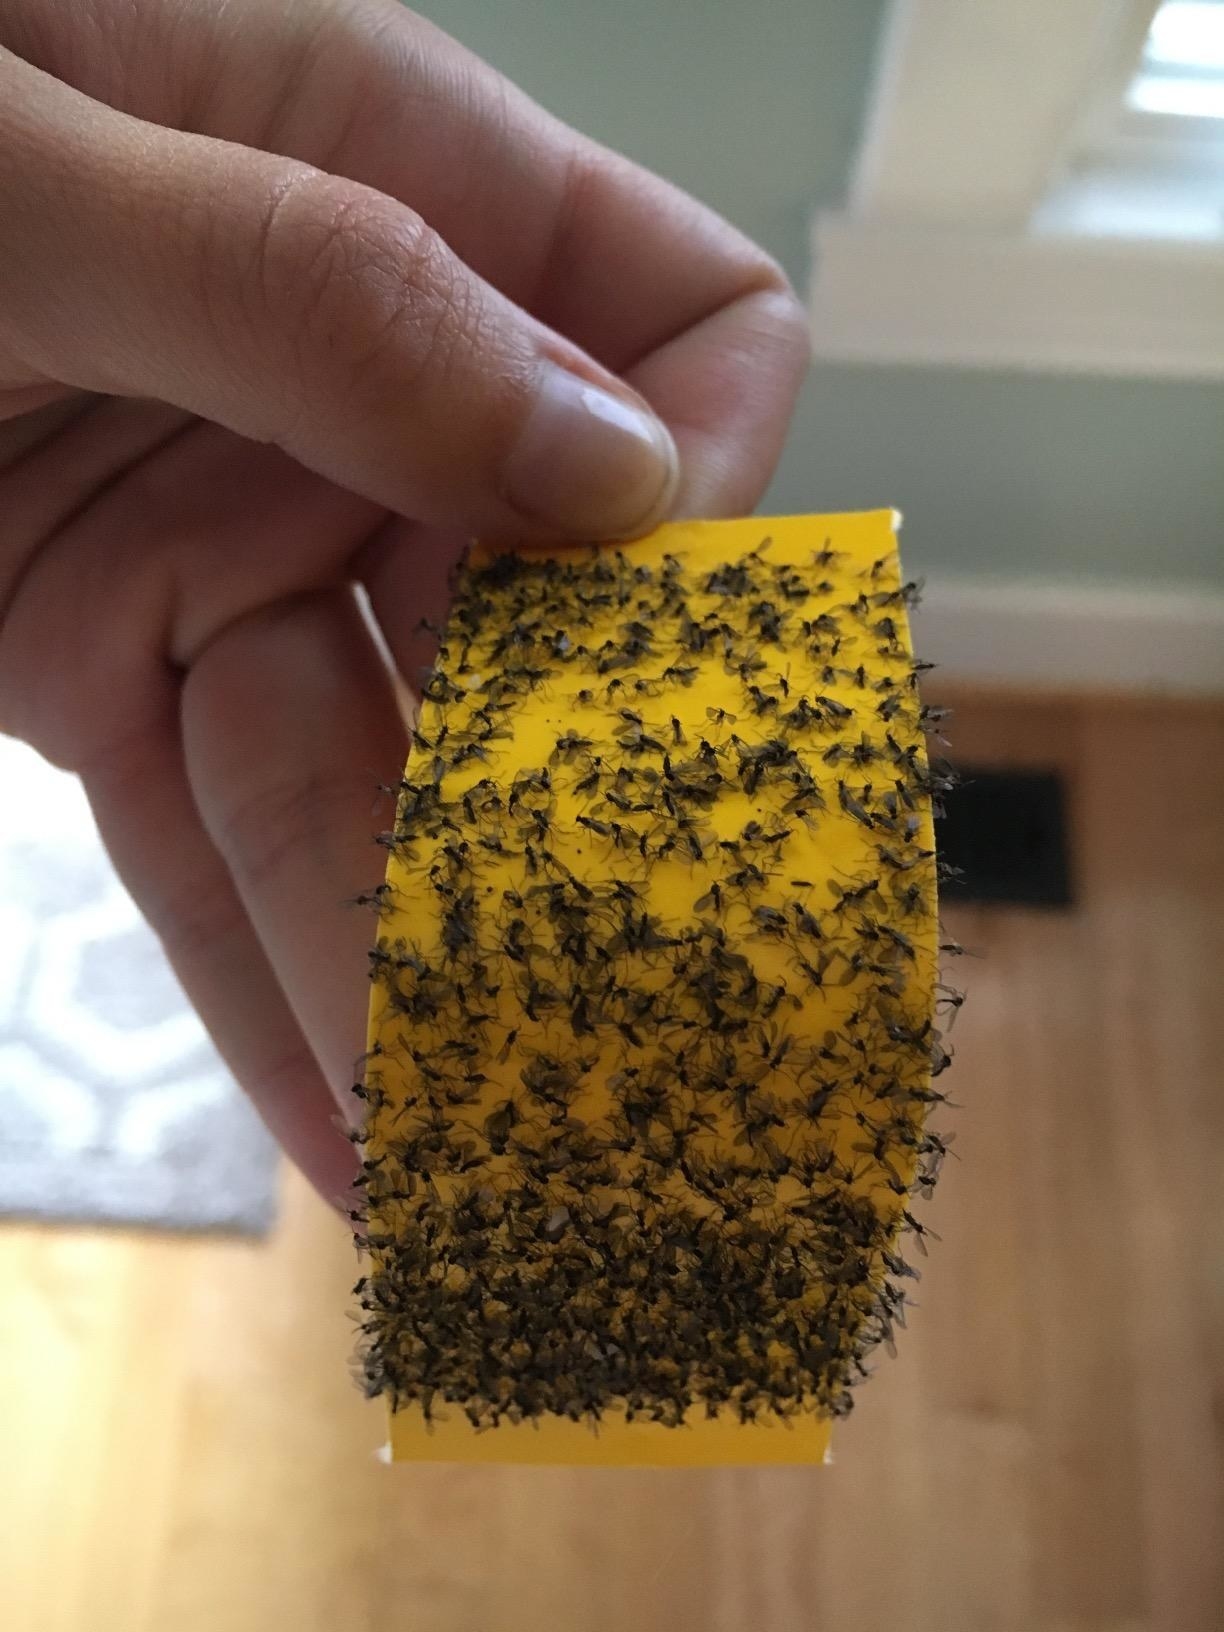 A reviewer holding the yellow sticky sheet filled with stuck-on gnats